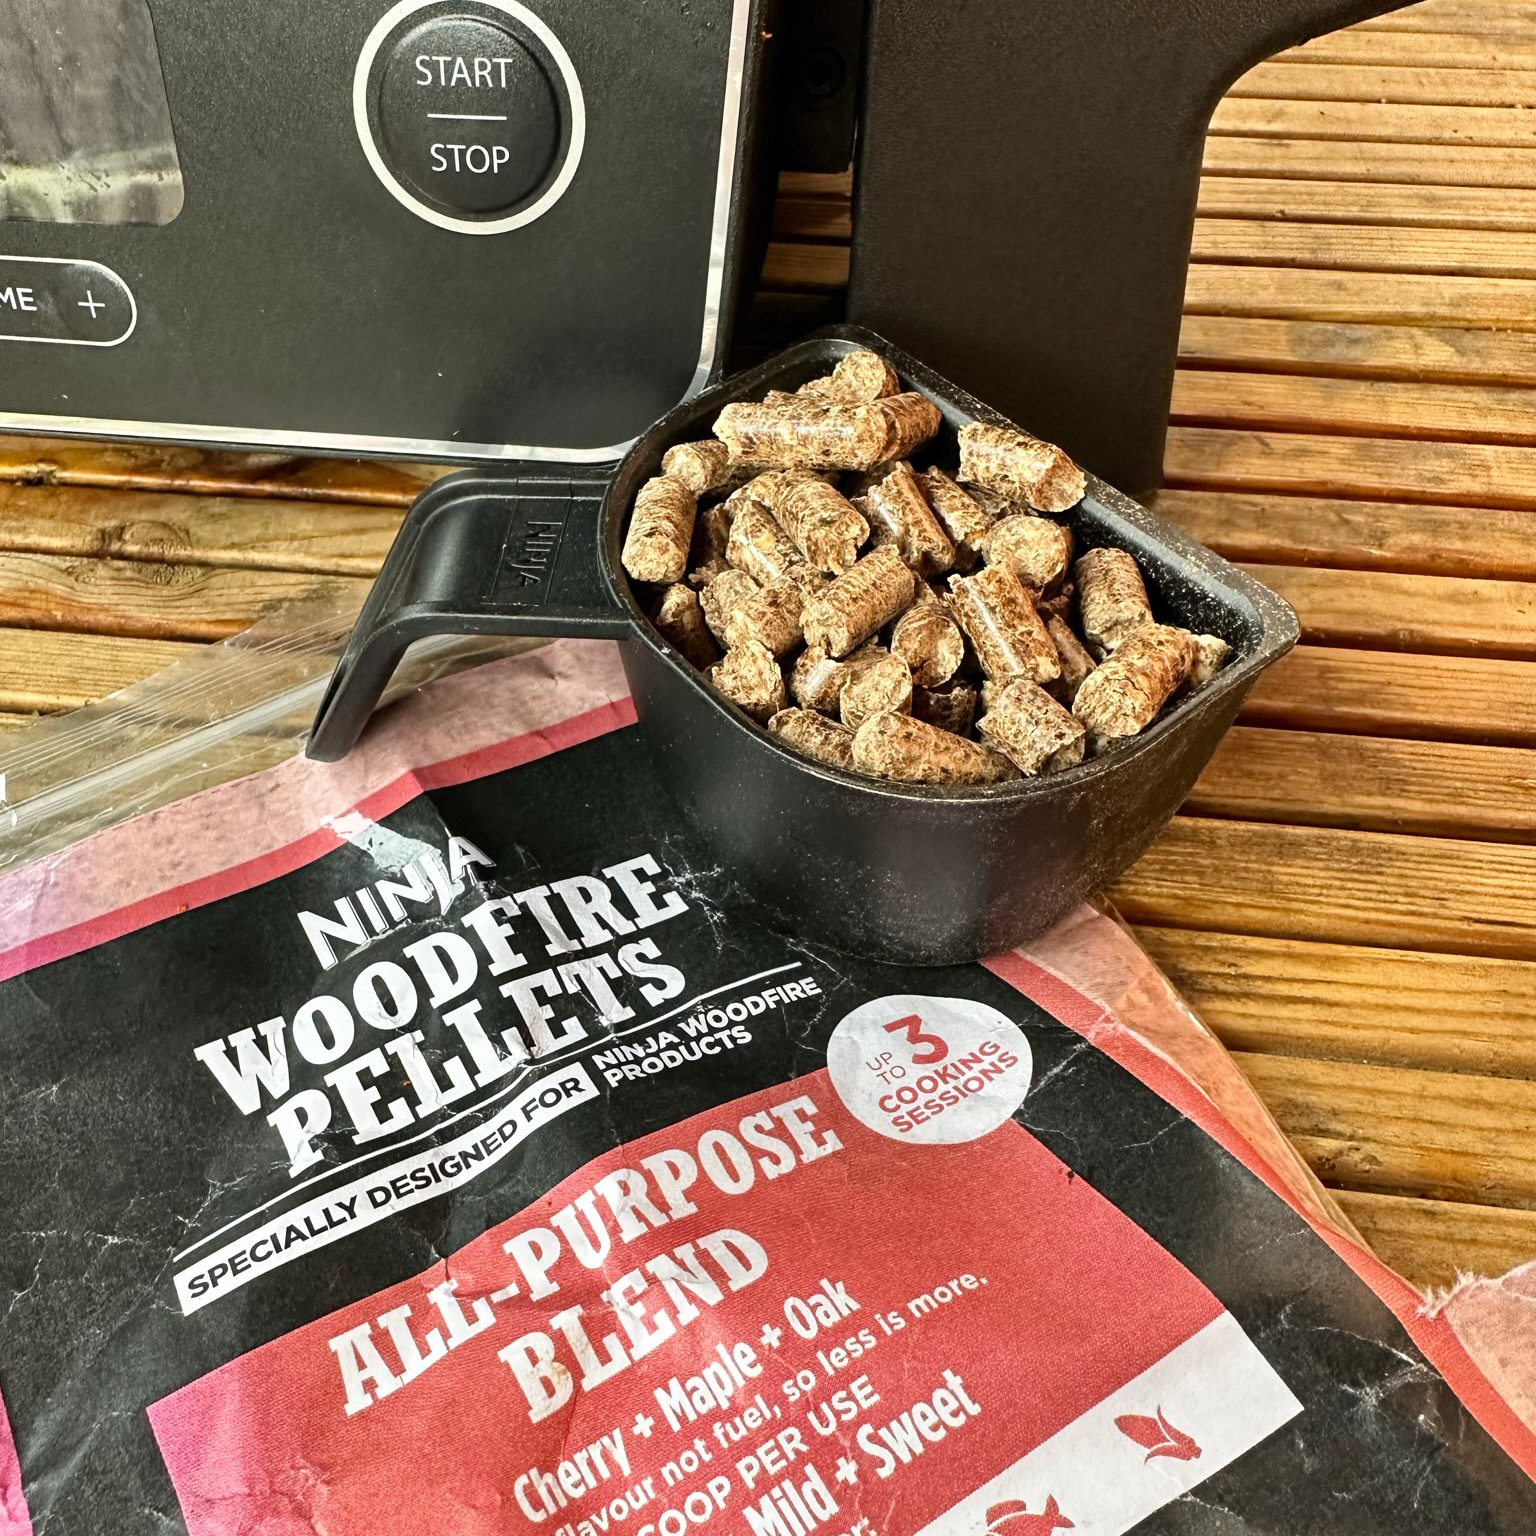 Does it matter what kind of pellets you use in the Ninja Woodfire